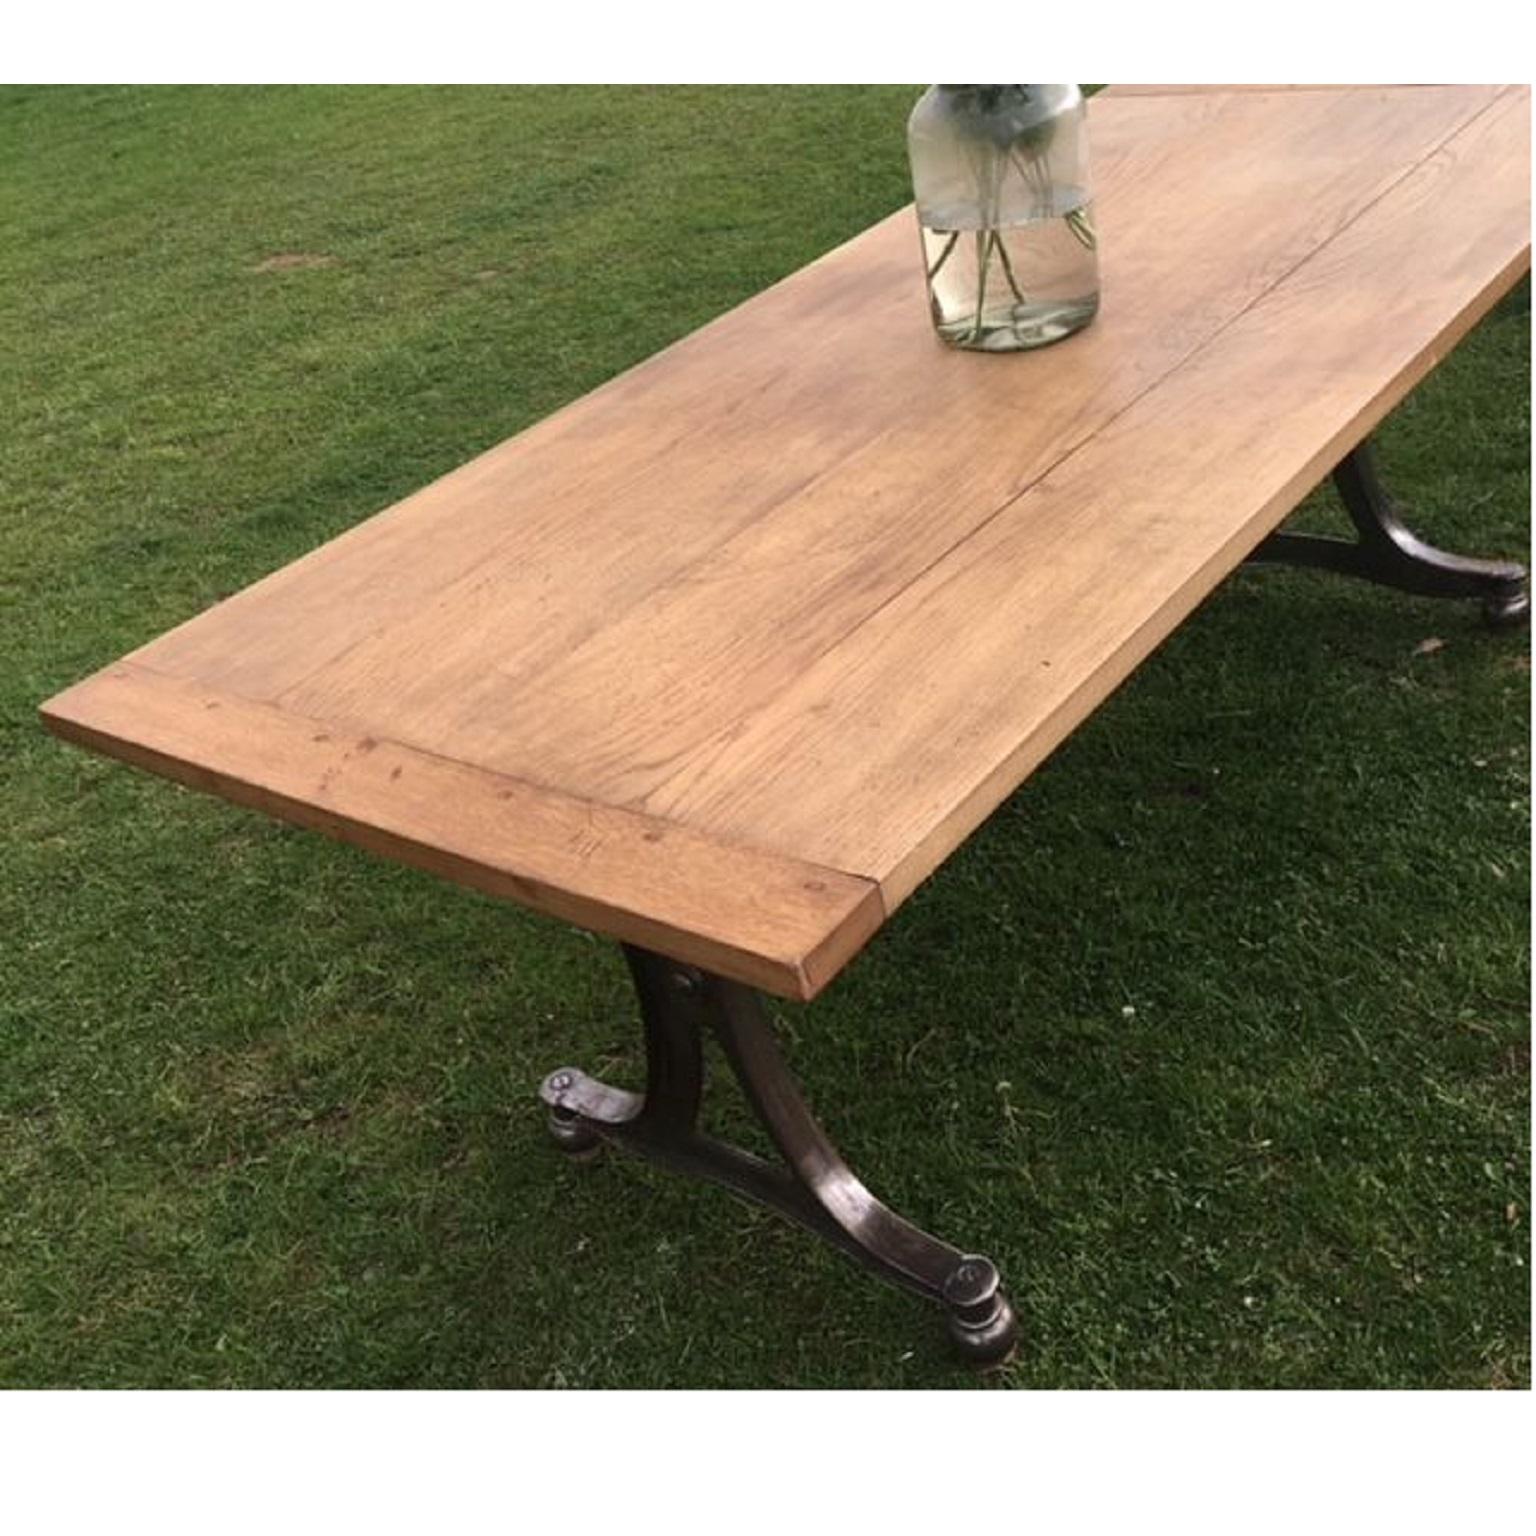 Oak top dining table with Industrial vintage cast iron legs. Reclaimed rustic style slightly distressed oak top (see images). On fabulous original Industrial legs, circa early 20th century, that have been stripped and polished.
This is a stunning